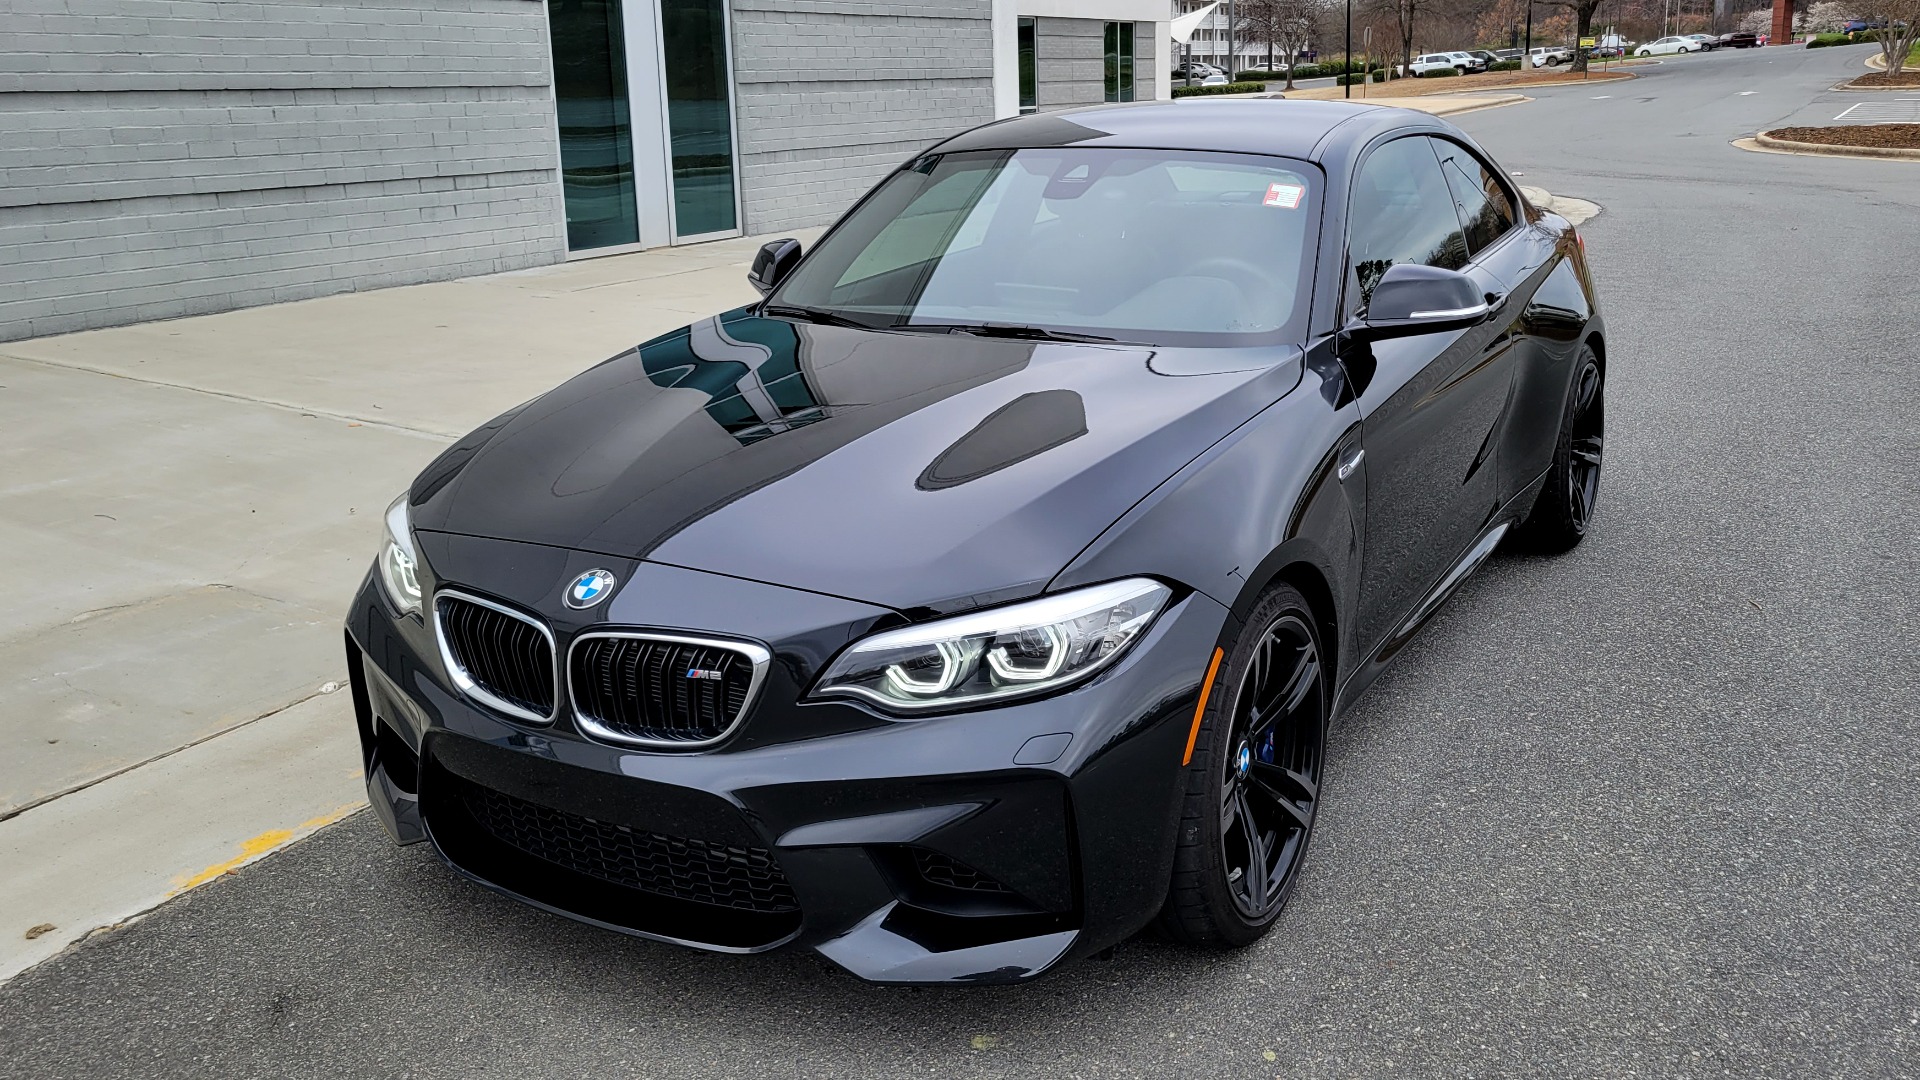 Used 2018 BMW M2 COUPE W/EXECUTIVE PKG / WIFI / H/K SND / PARK ASST / REARVIEW for sale Sold at Formula Imports in Charlotte NC 28227 2